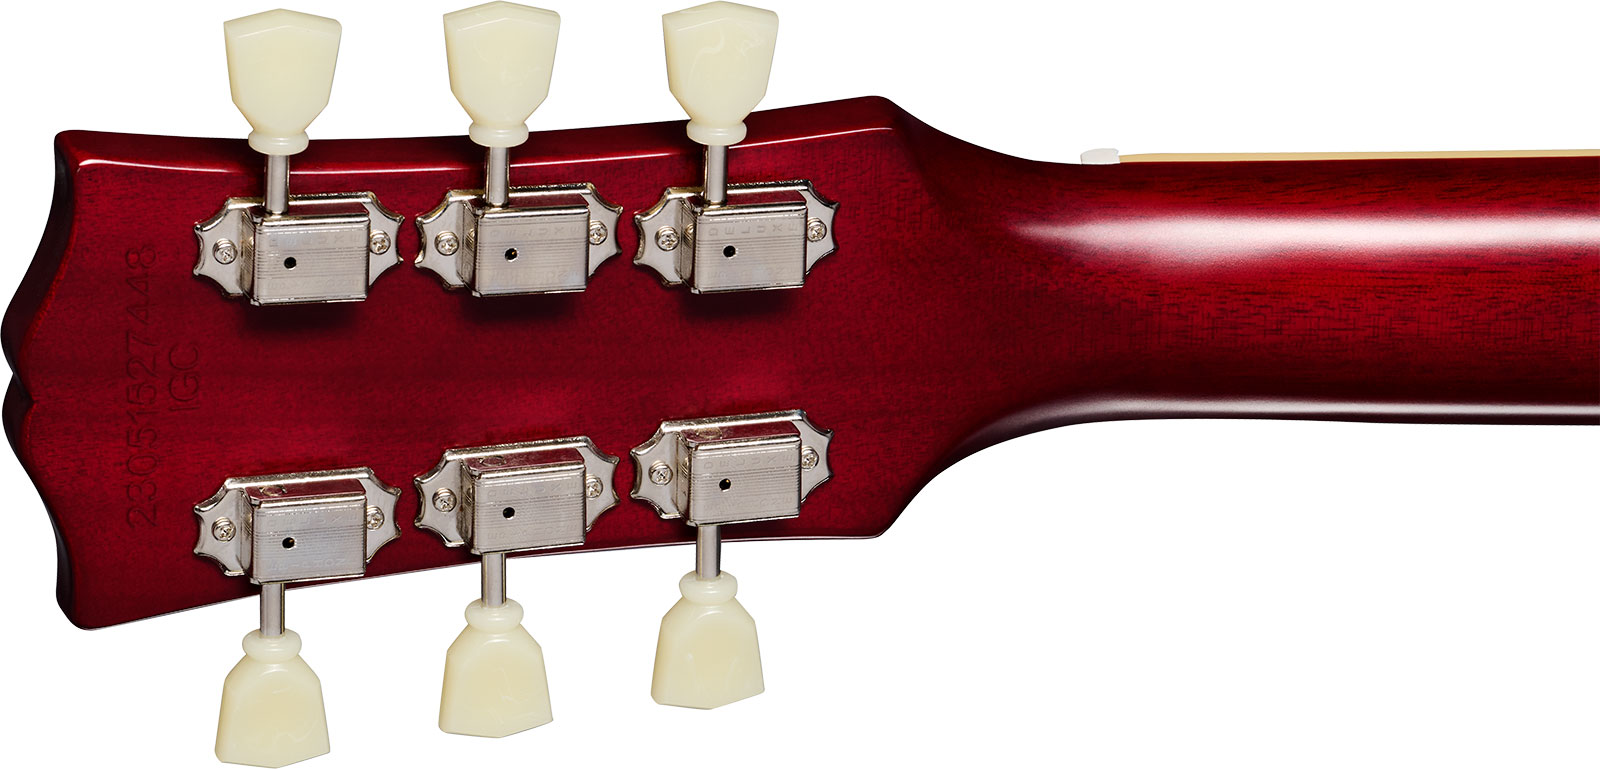 Epiphone 1959 Les Paul Standard Inspired By 2h Gibson Ht Lau - Vos Factory Burst - Single cut electric guitar - Variation 4